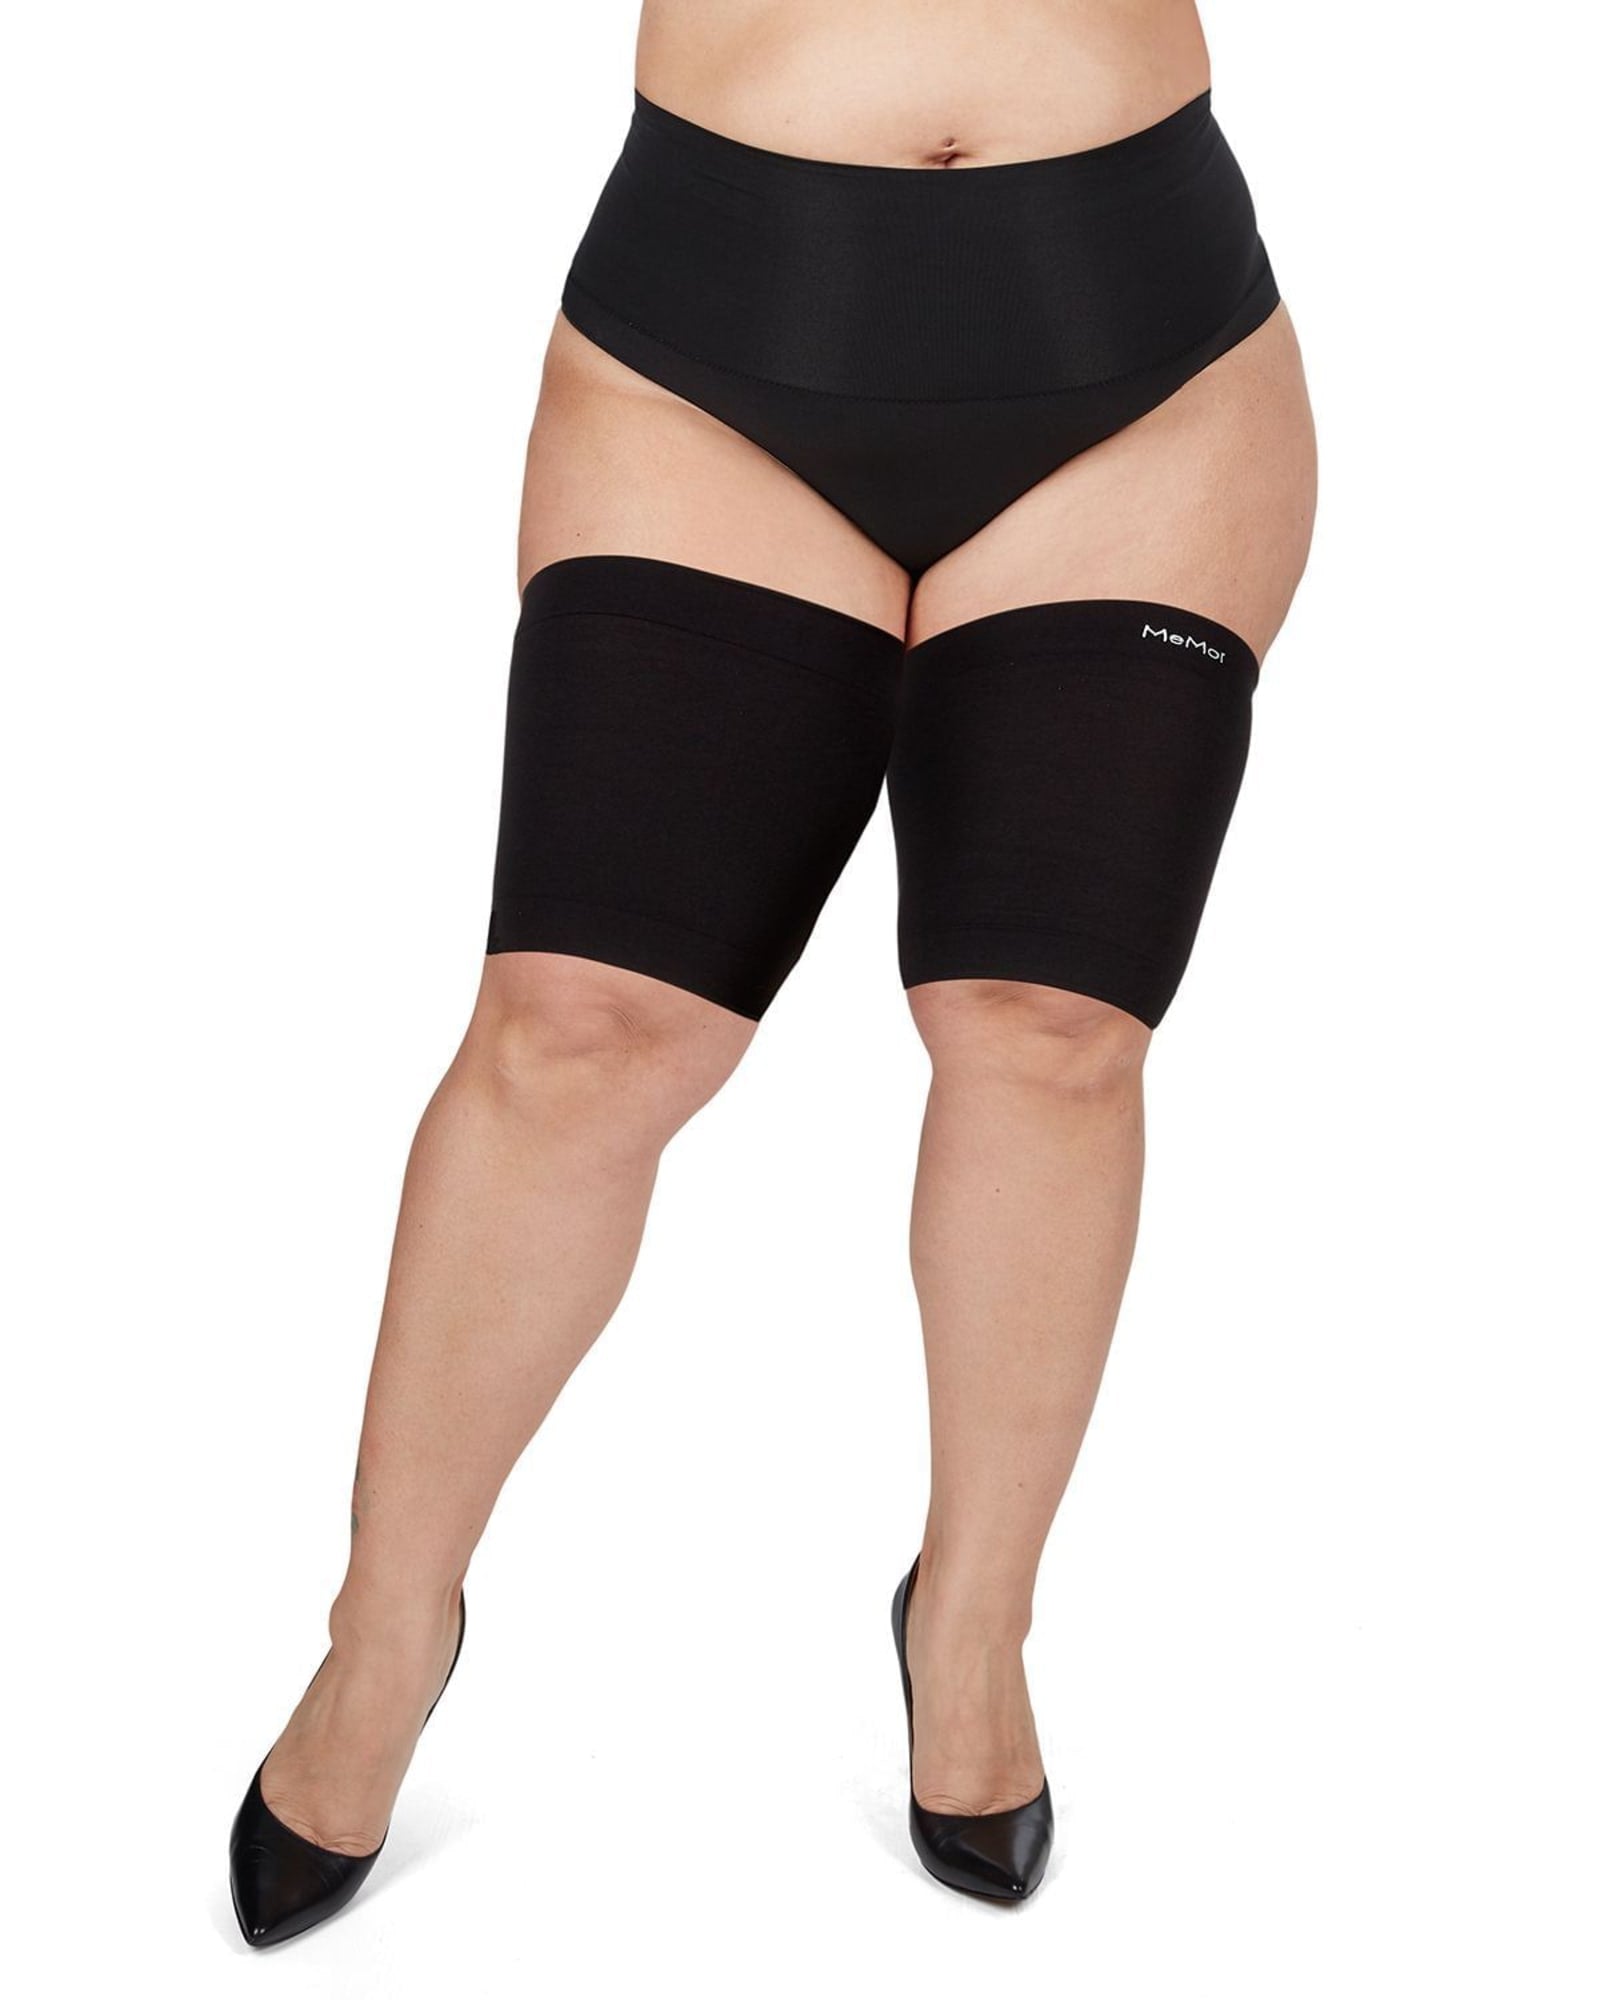 Women Shorts Anti-Chafing Thigh Chafing Thighs Plus Size size 5/6 pantyhose